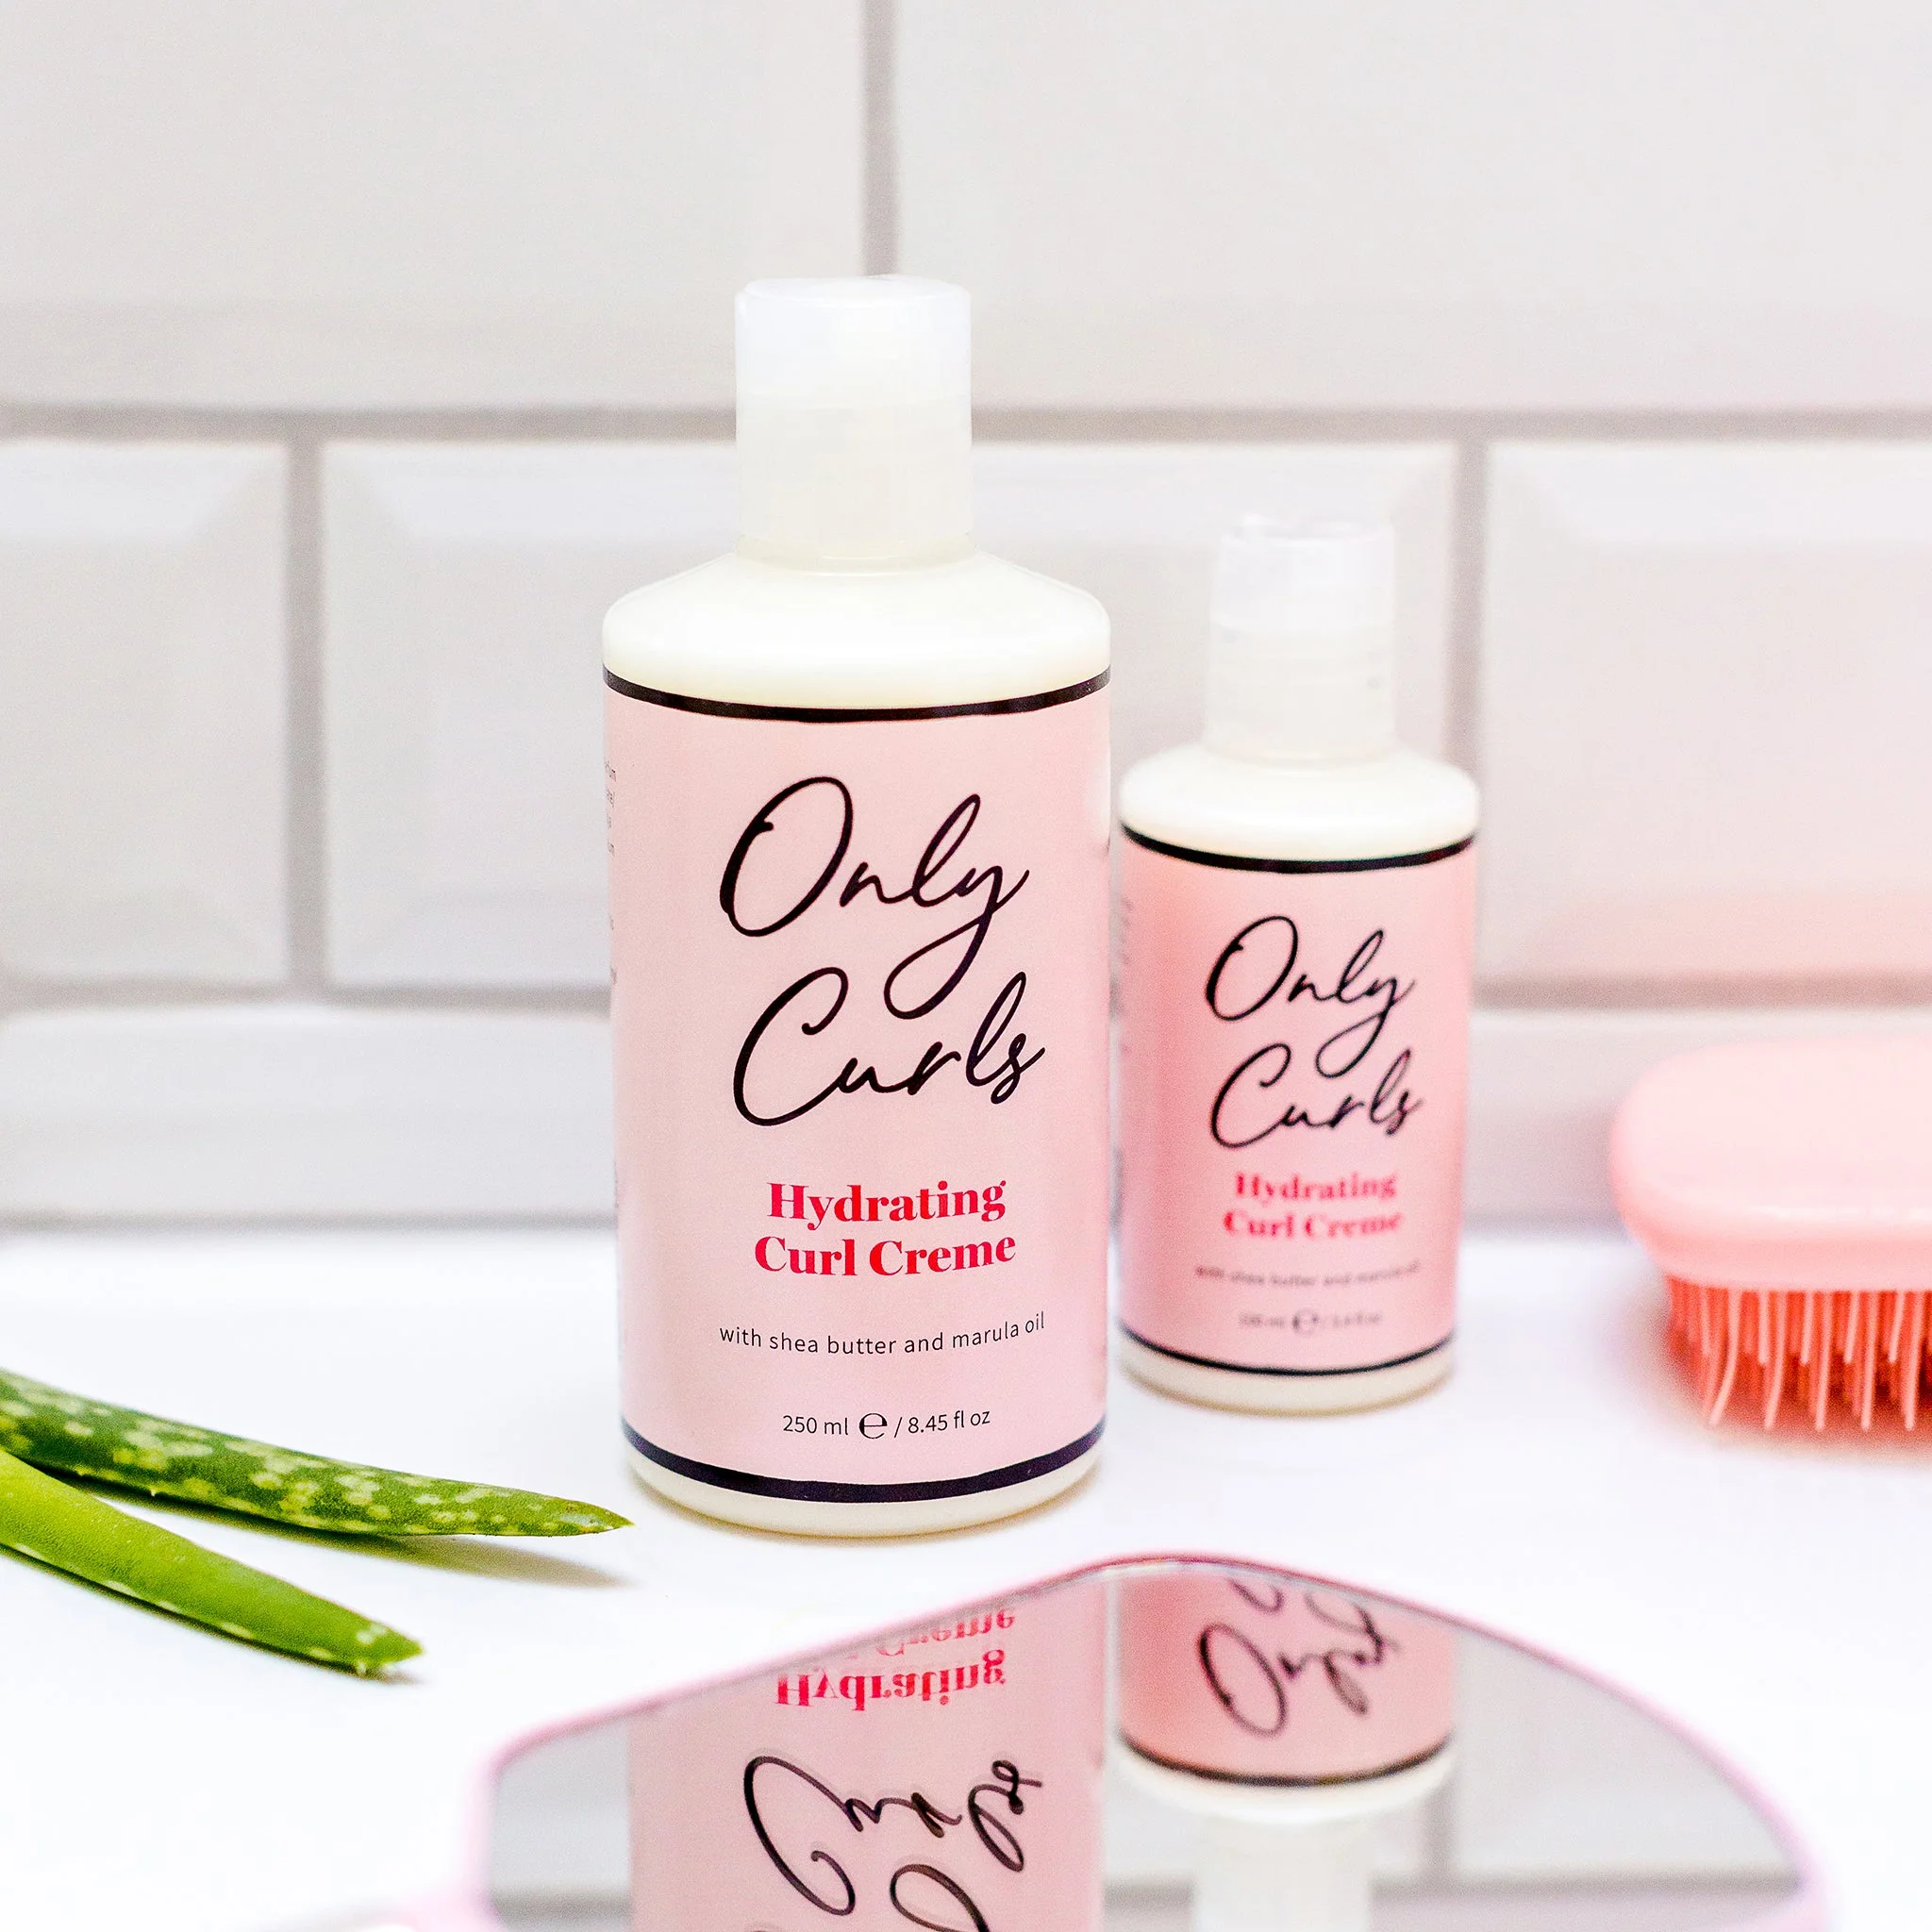 Only Curls Hydrating Curl Creme - Travel Size